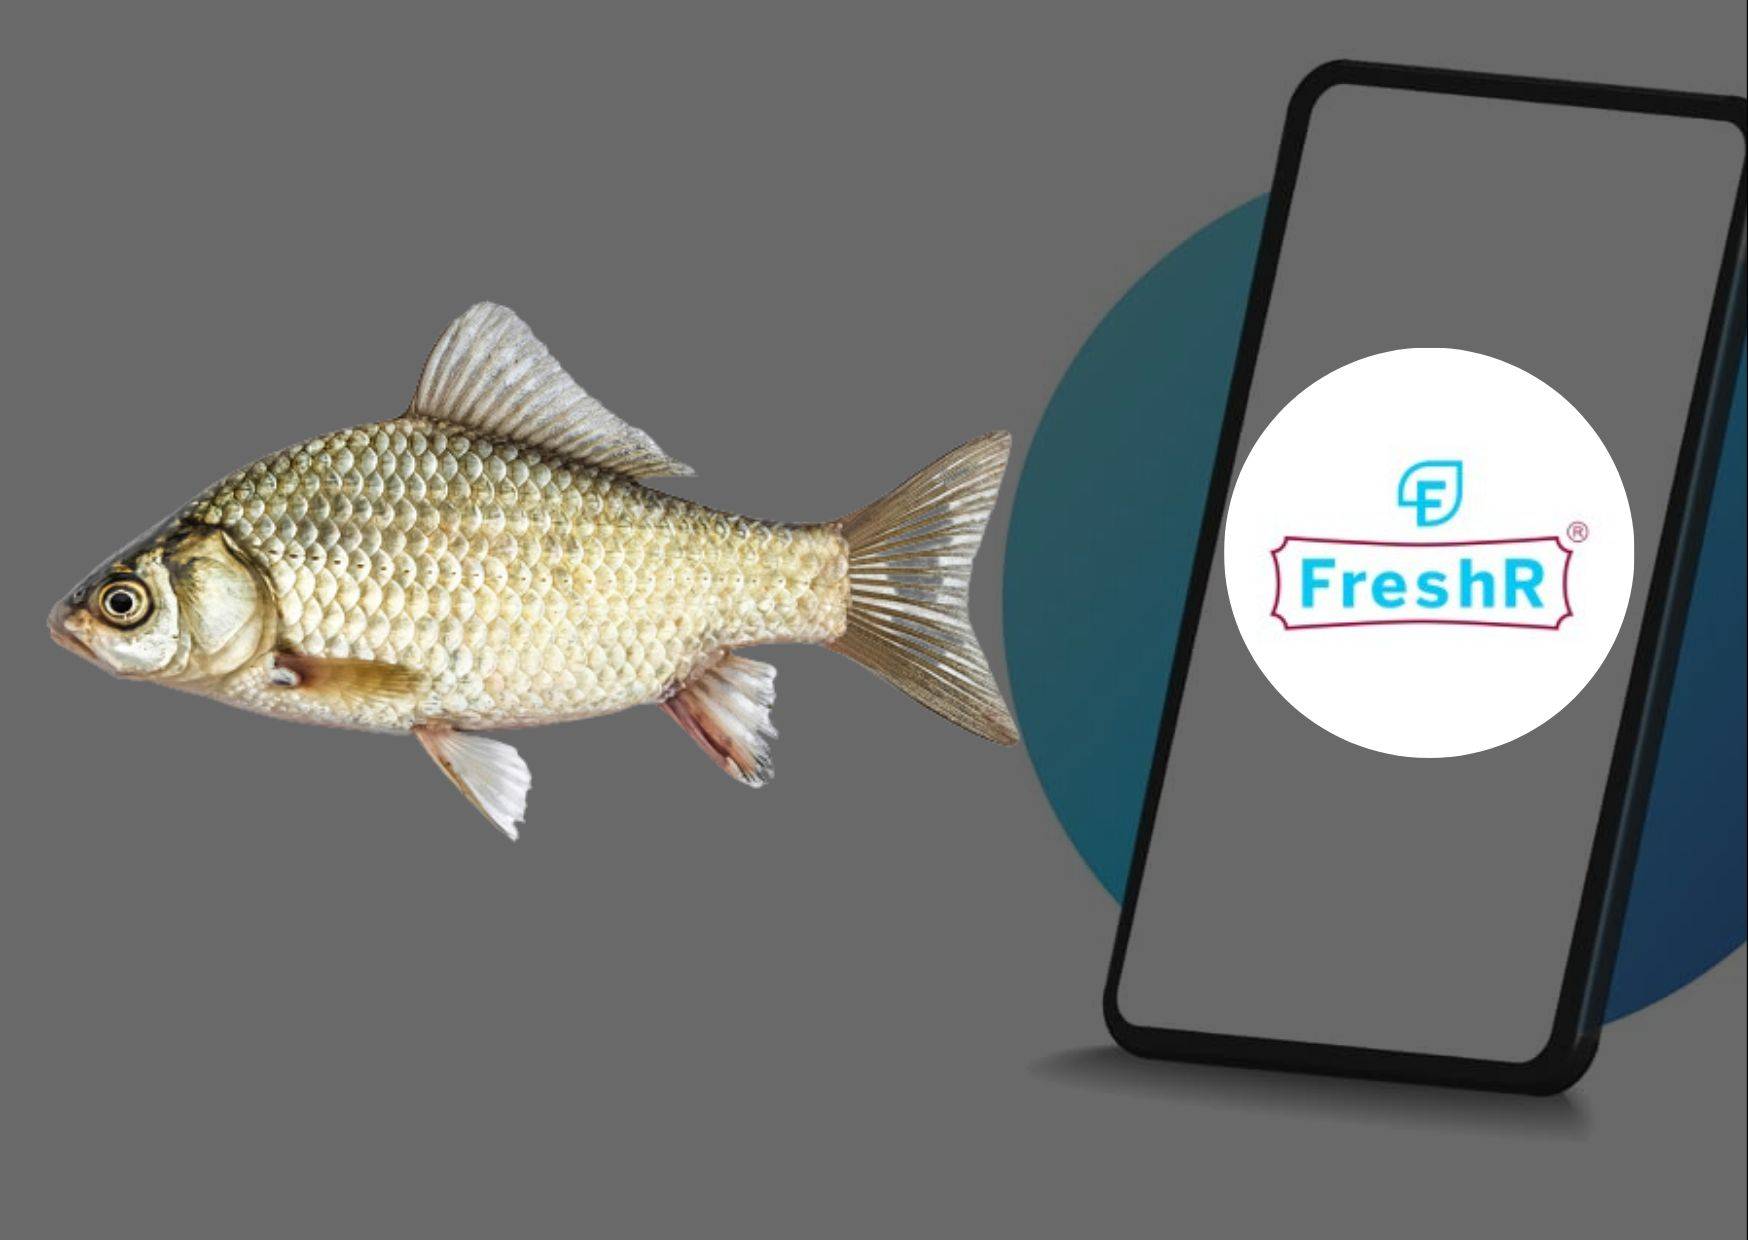 Odisha-based start-up FreshR comes up with India’s first app in fishery sector for bulk purchases